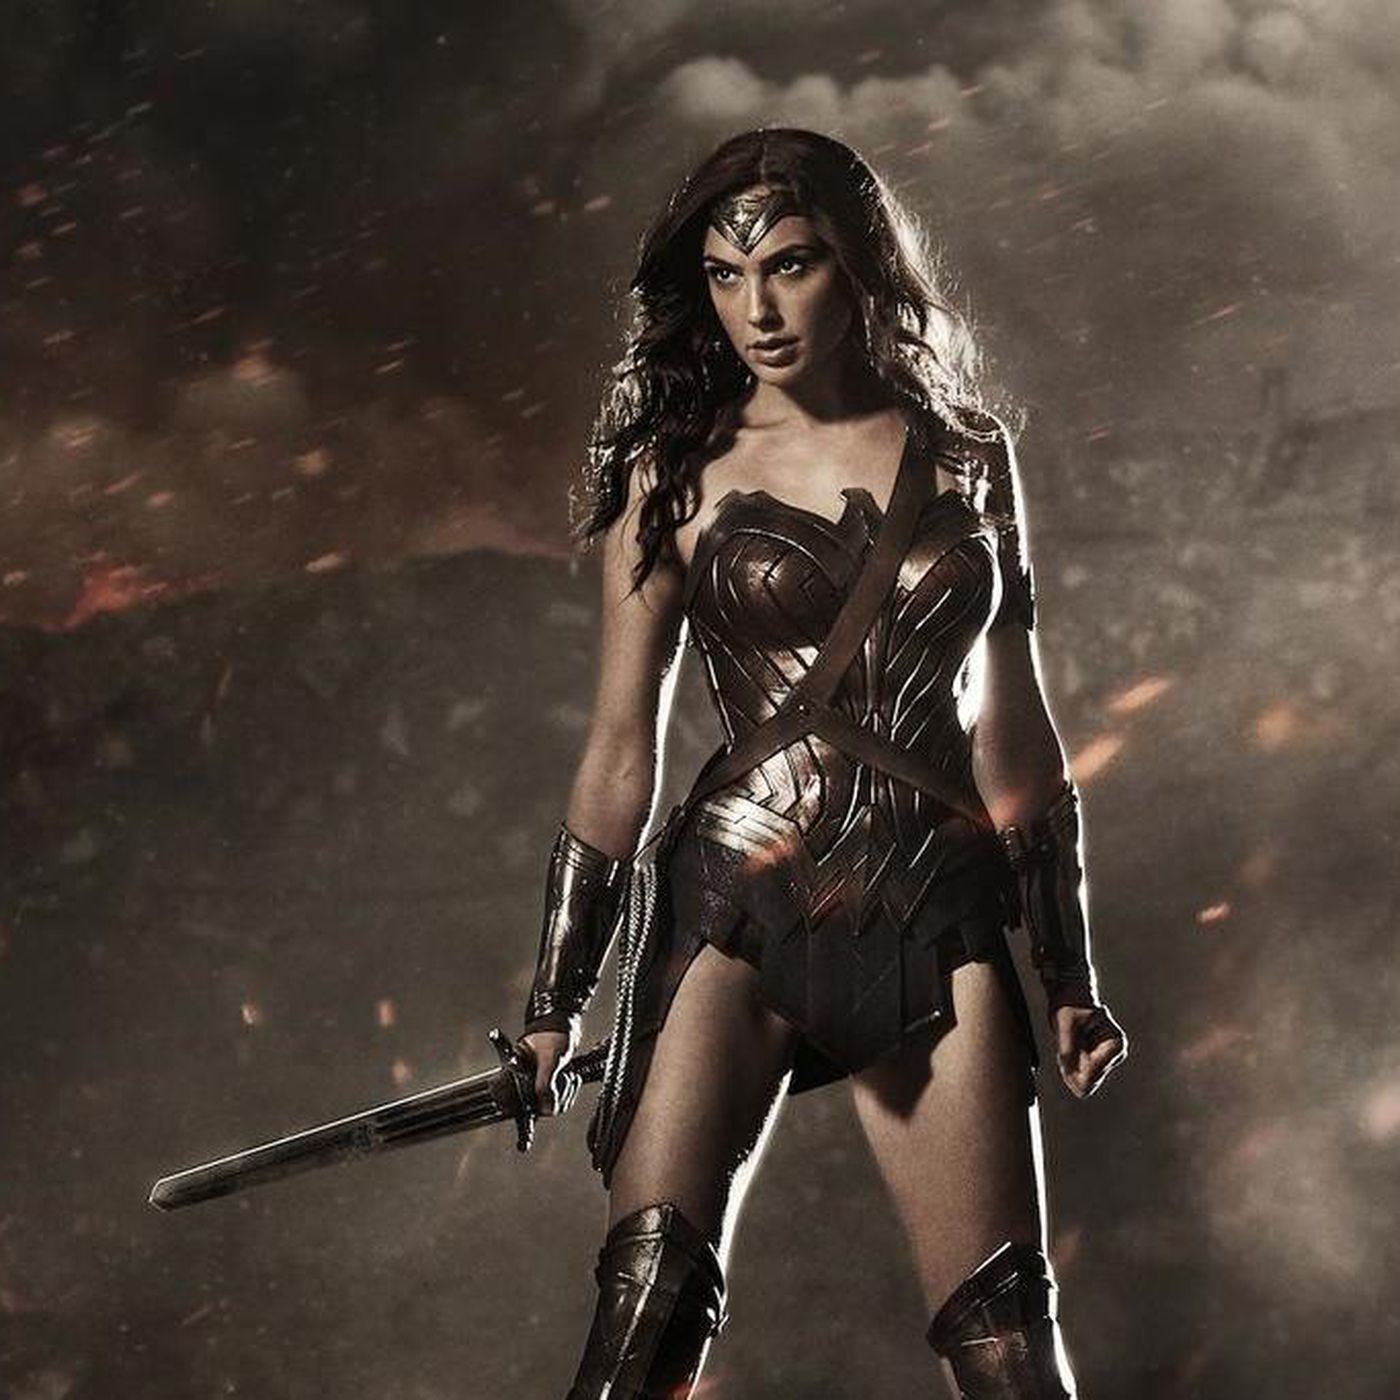 The Wonder Woman movie is coming sooner than expected